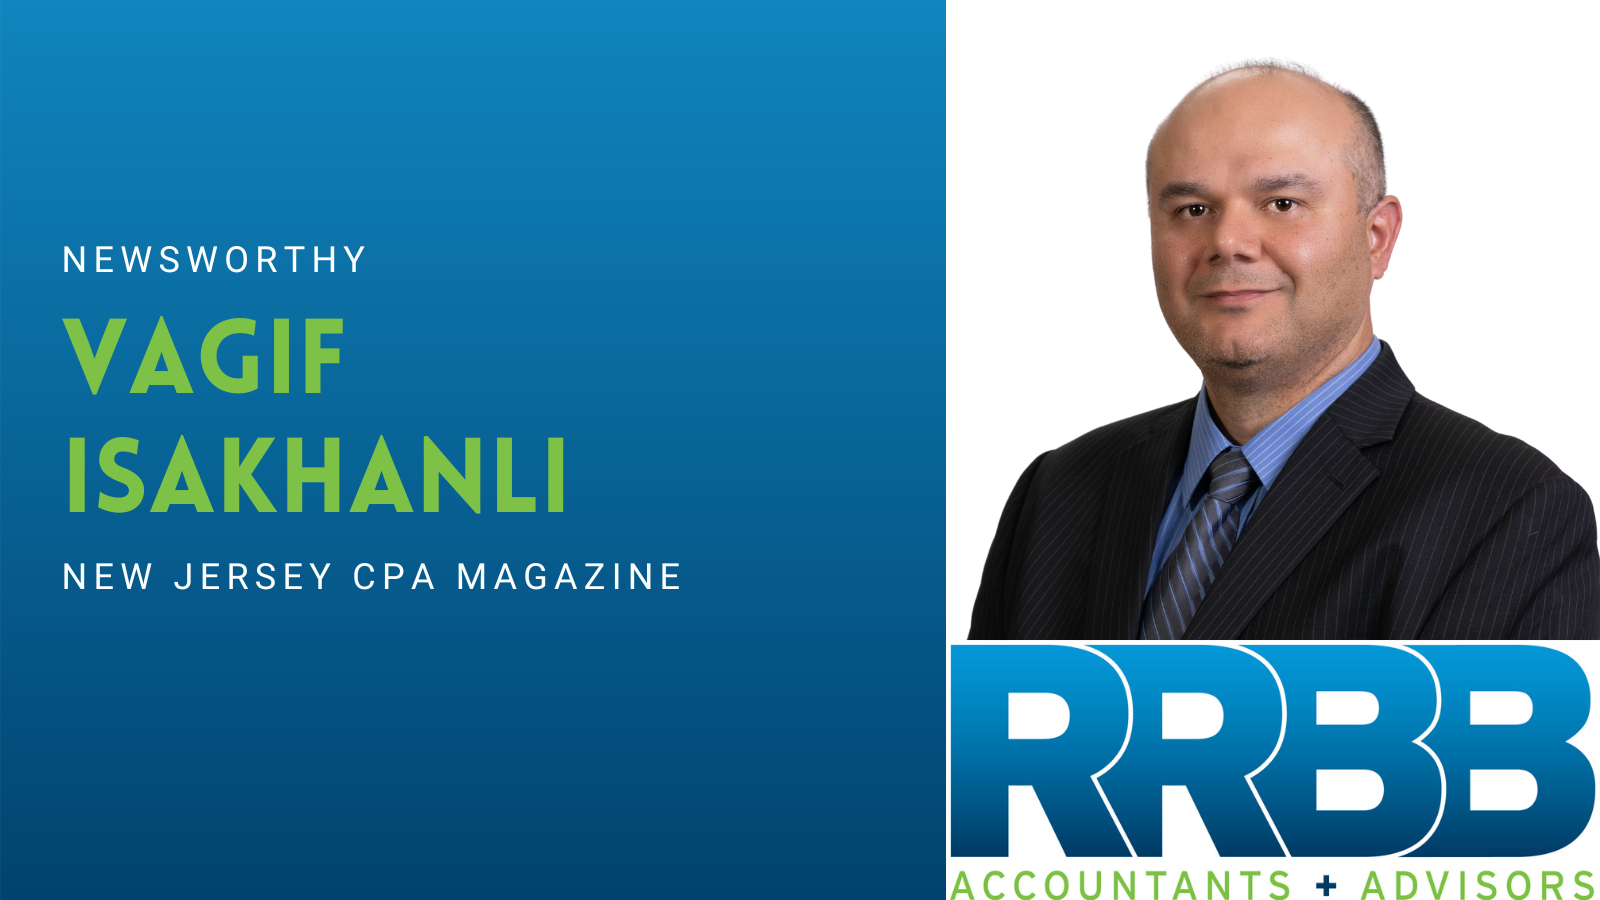 Vagif Isakhanli Published by NJCPA in New Jersey CPA Magazine